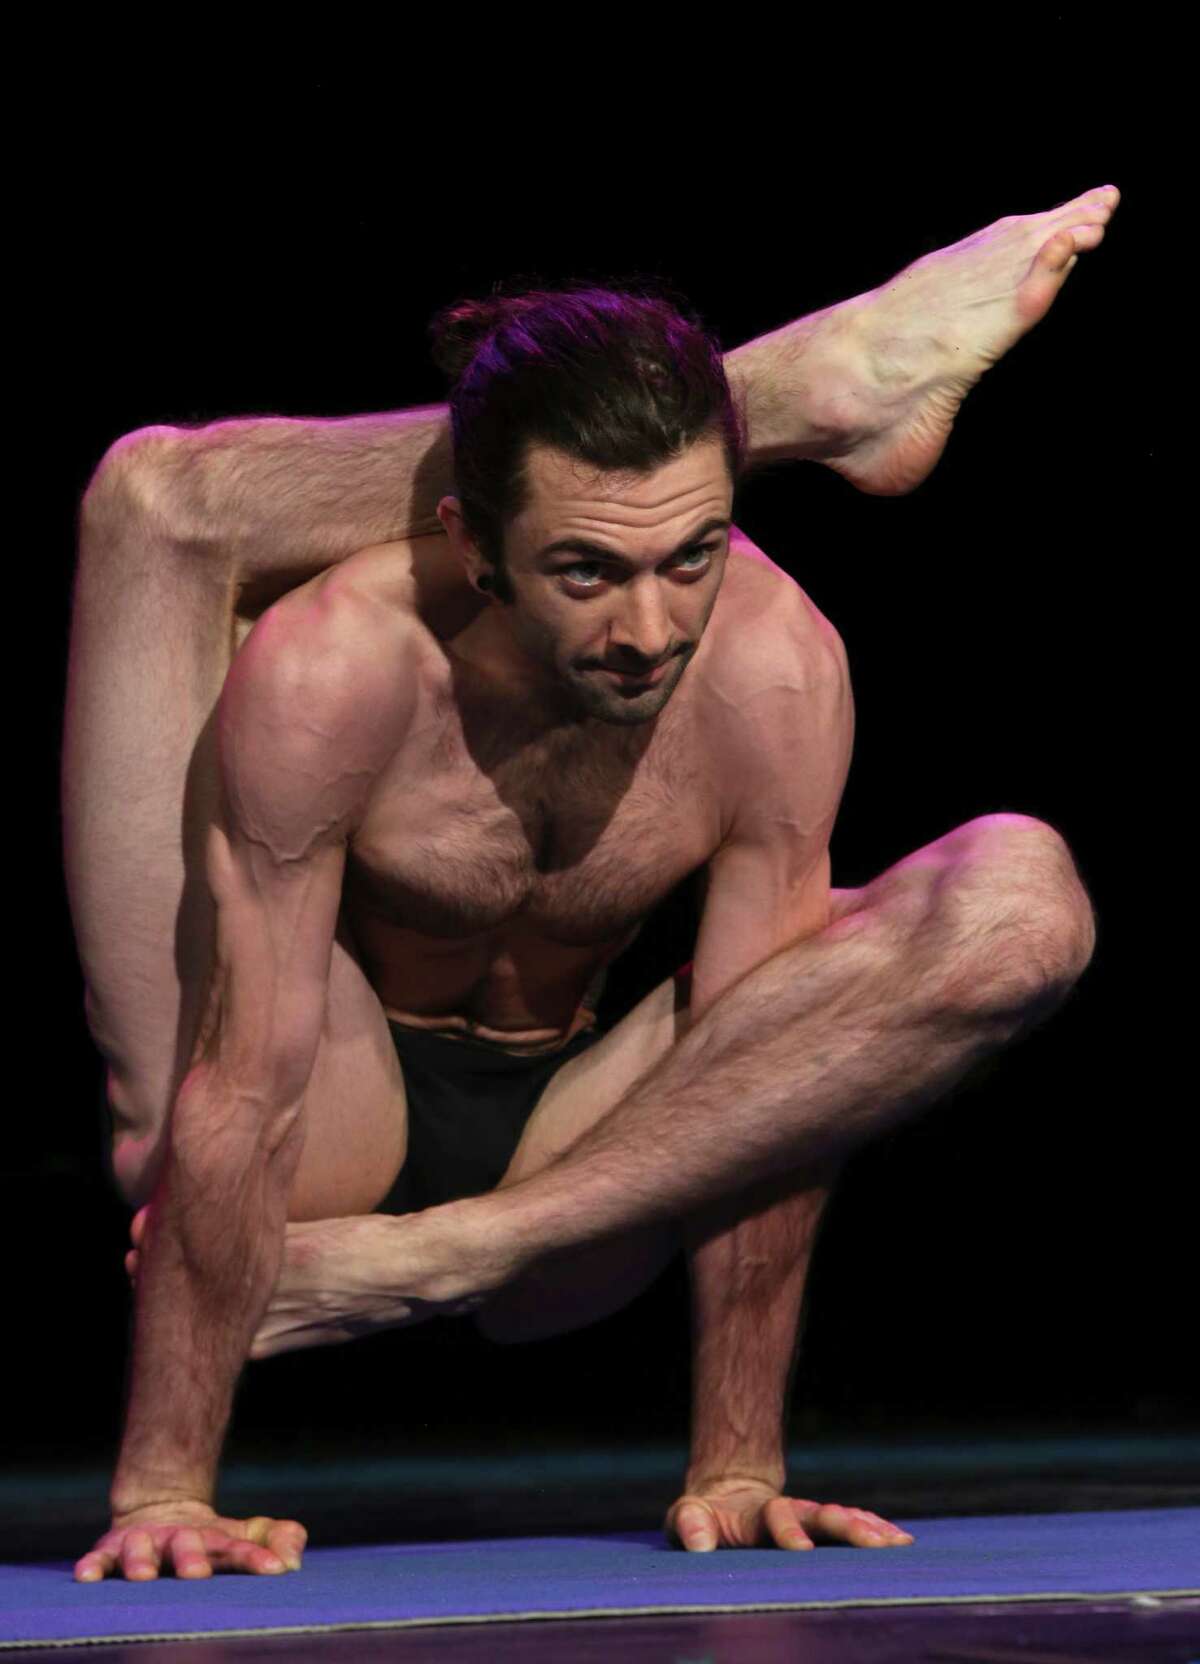 Spencer Larson executes the Om pose at the preliminaries of the 2014 USA Yoga National Championship on Friday March 14, 2014 at Aztec Theatre.